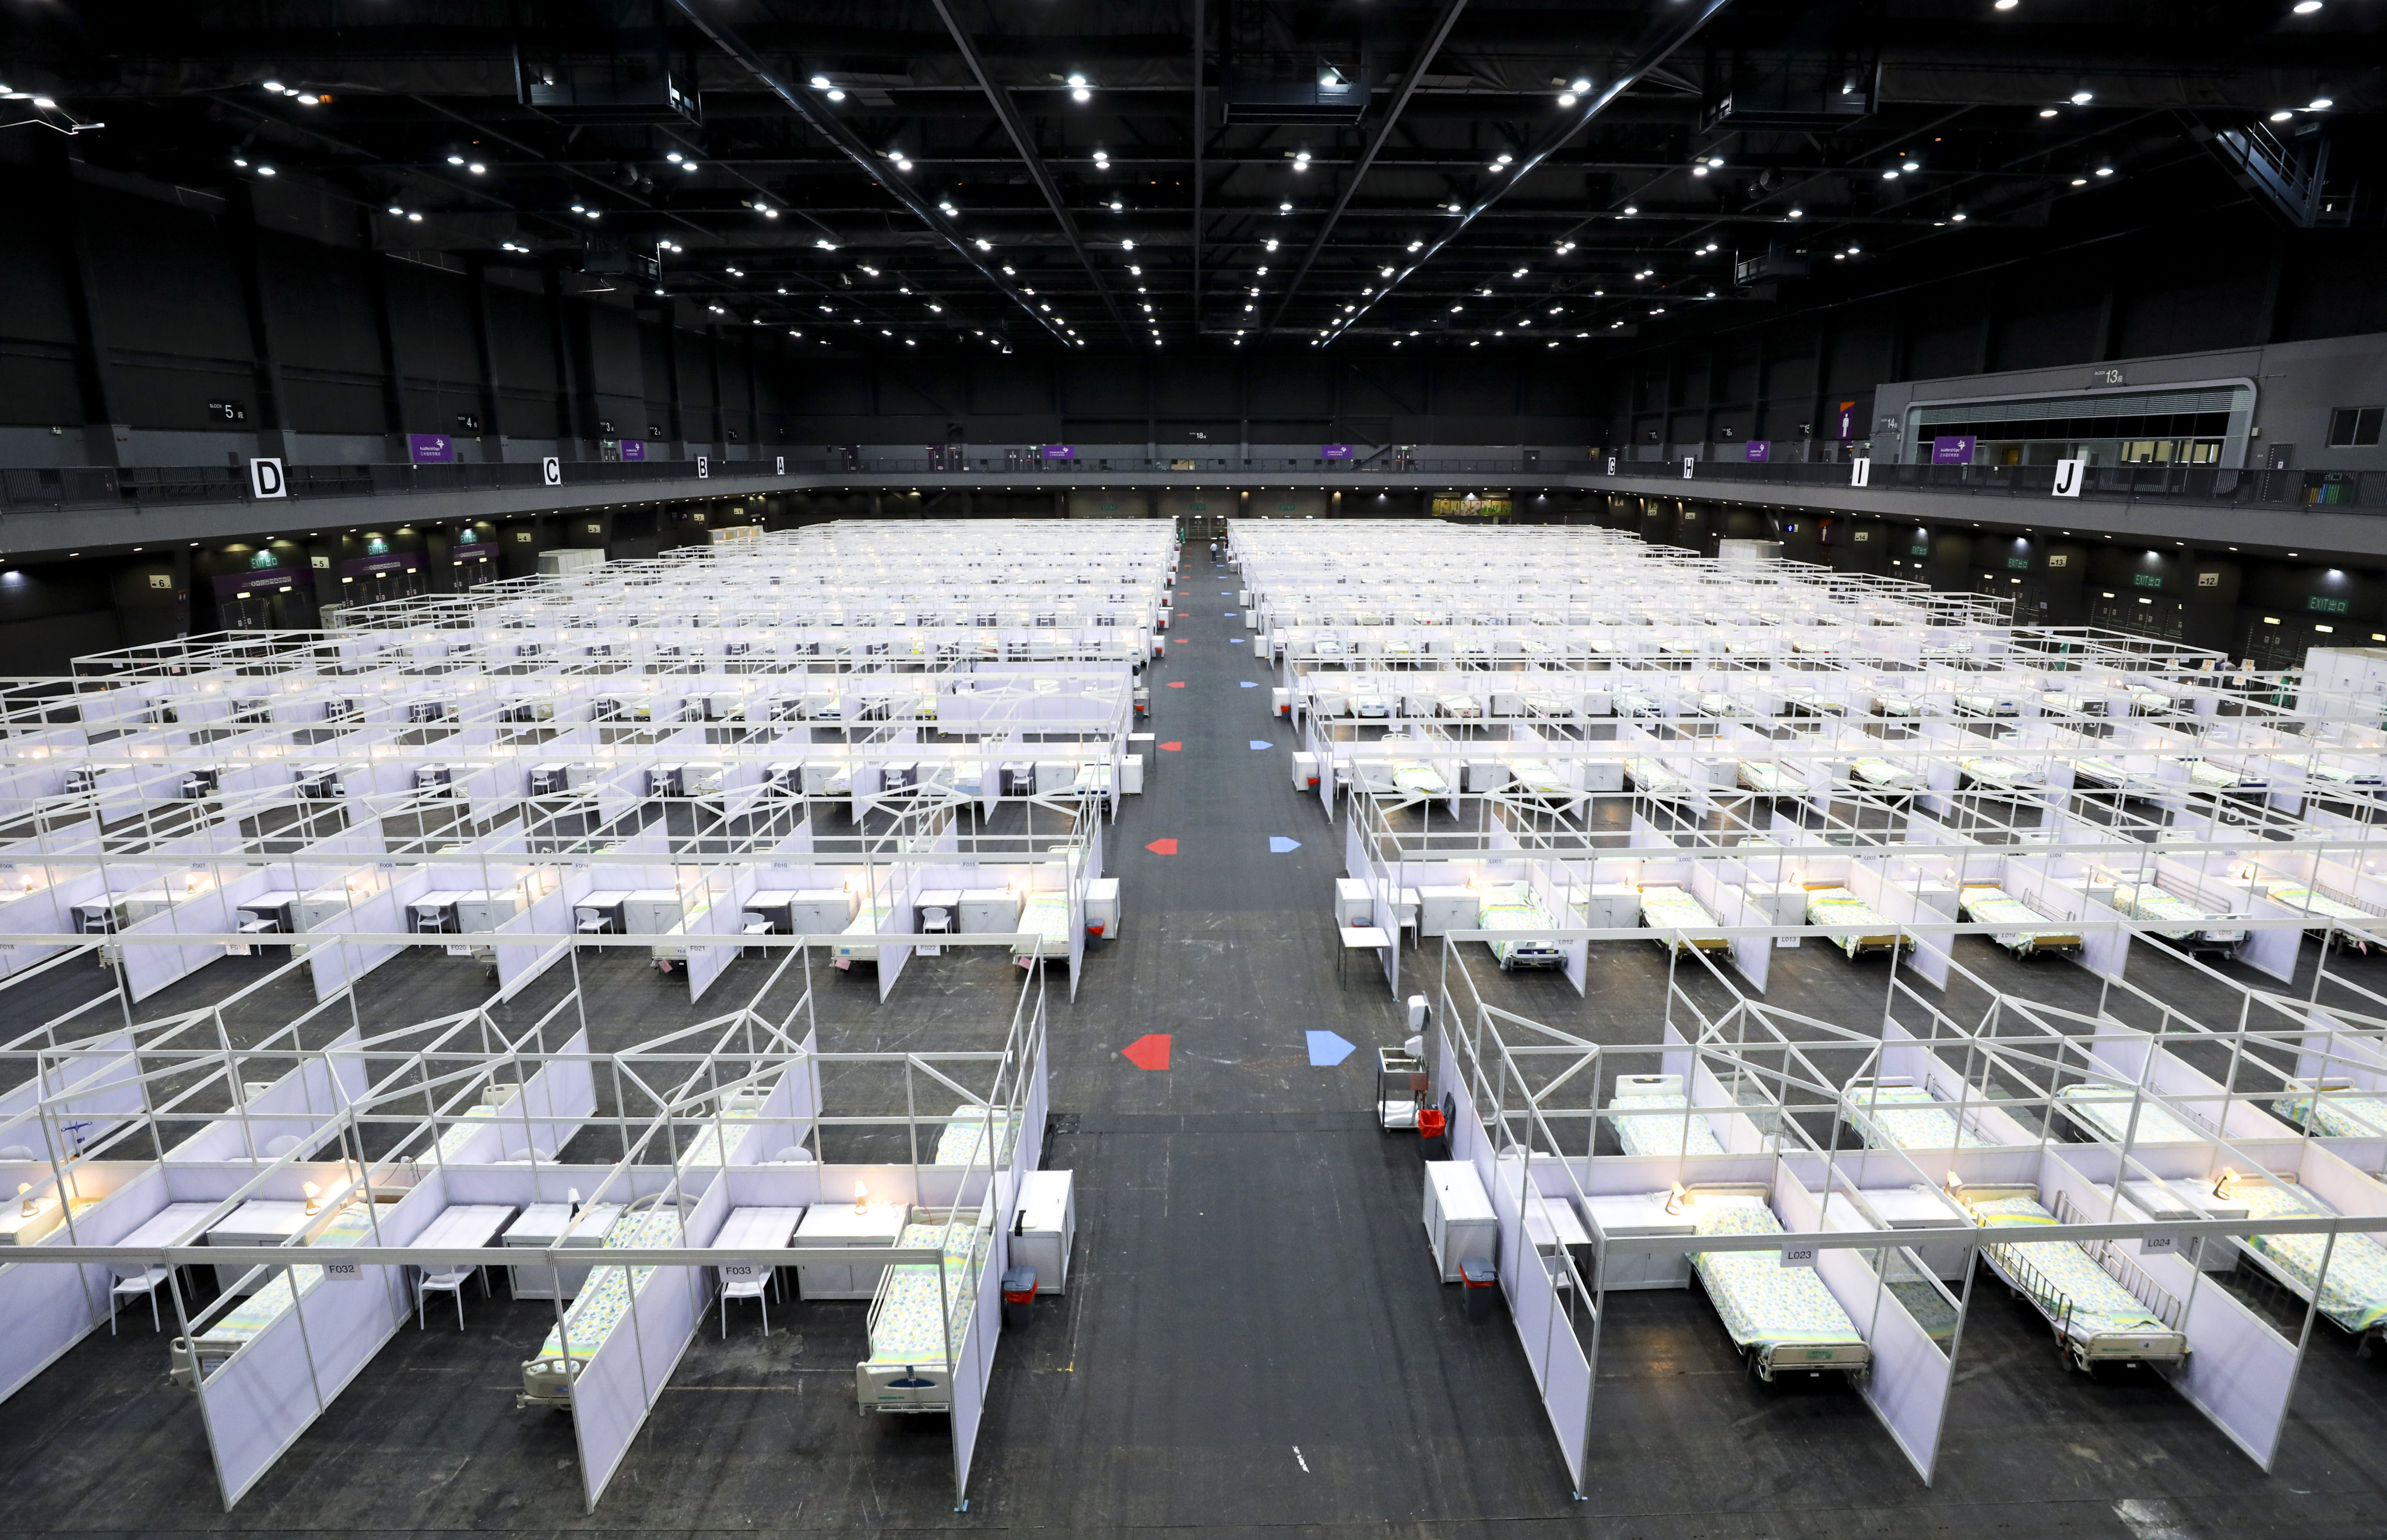 Beds set up for Covid-19 patients at AsiaWorld-Expo. Photo: Dickson Lee